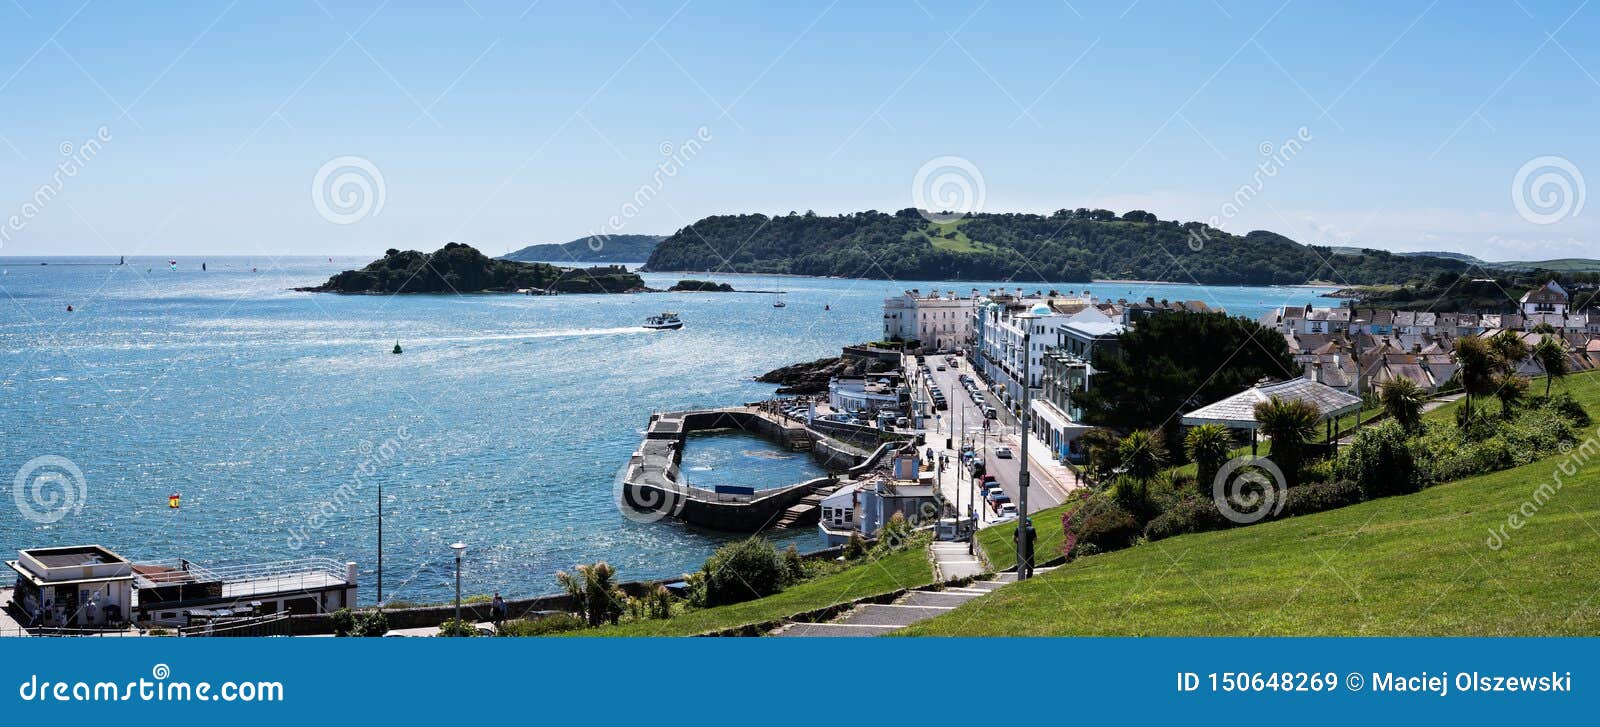 panorama of hoe waterfronts - plymouth, devon, england